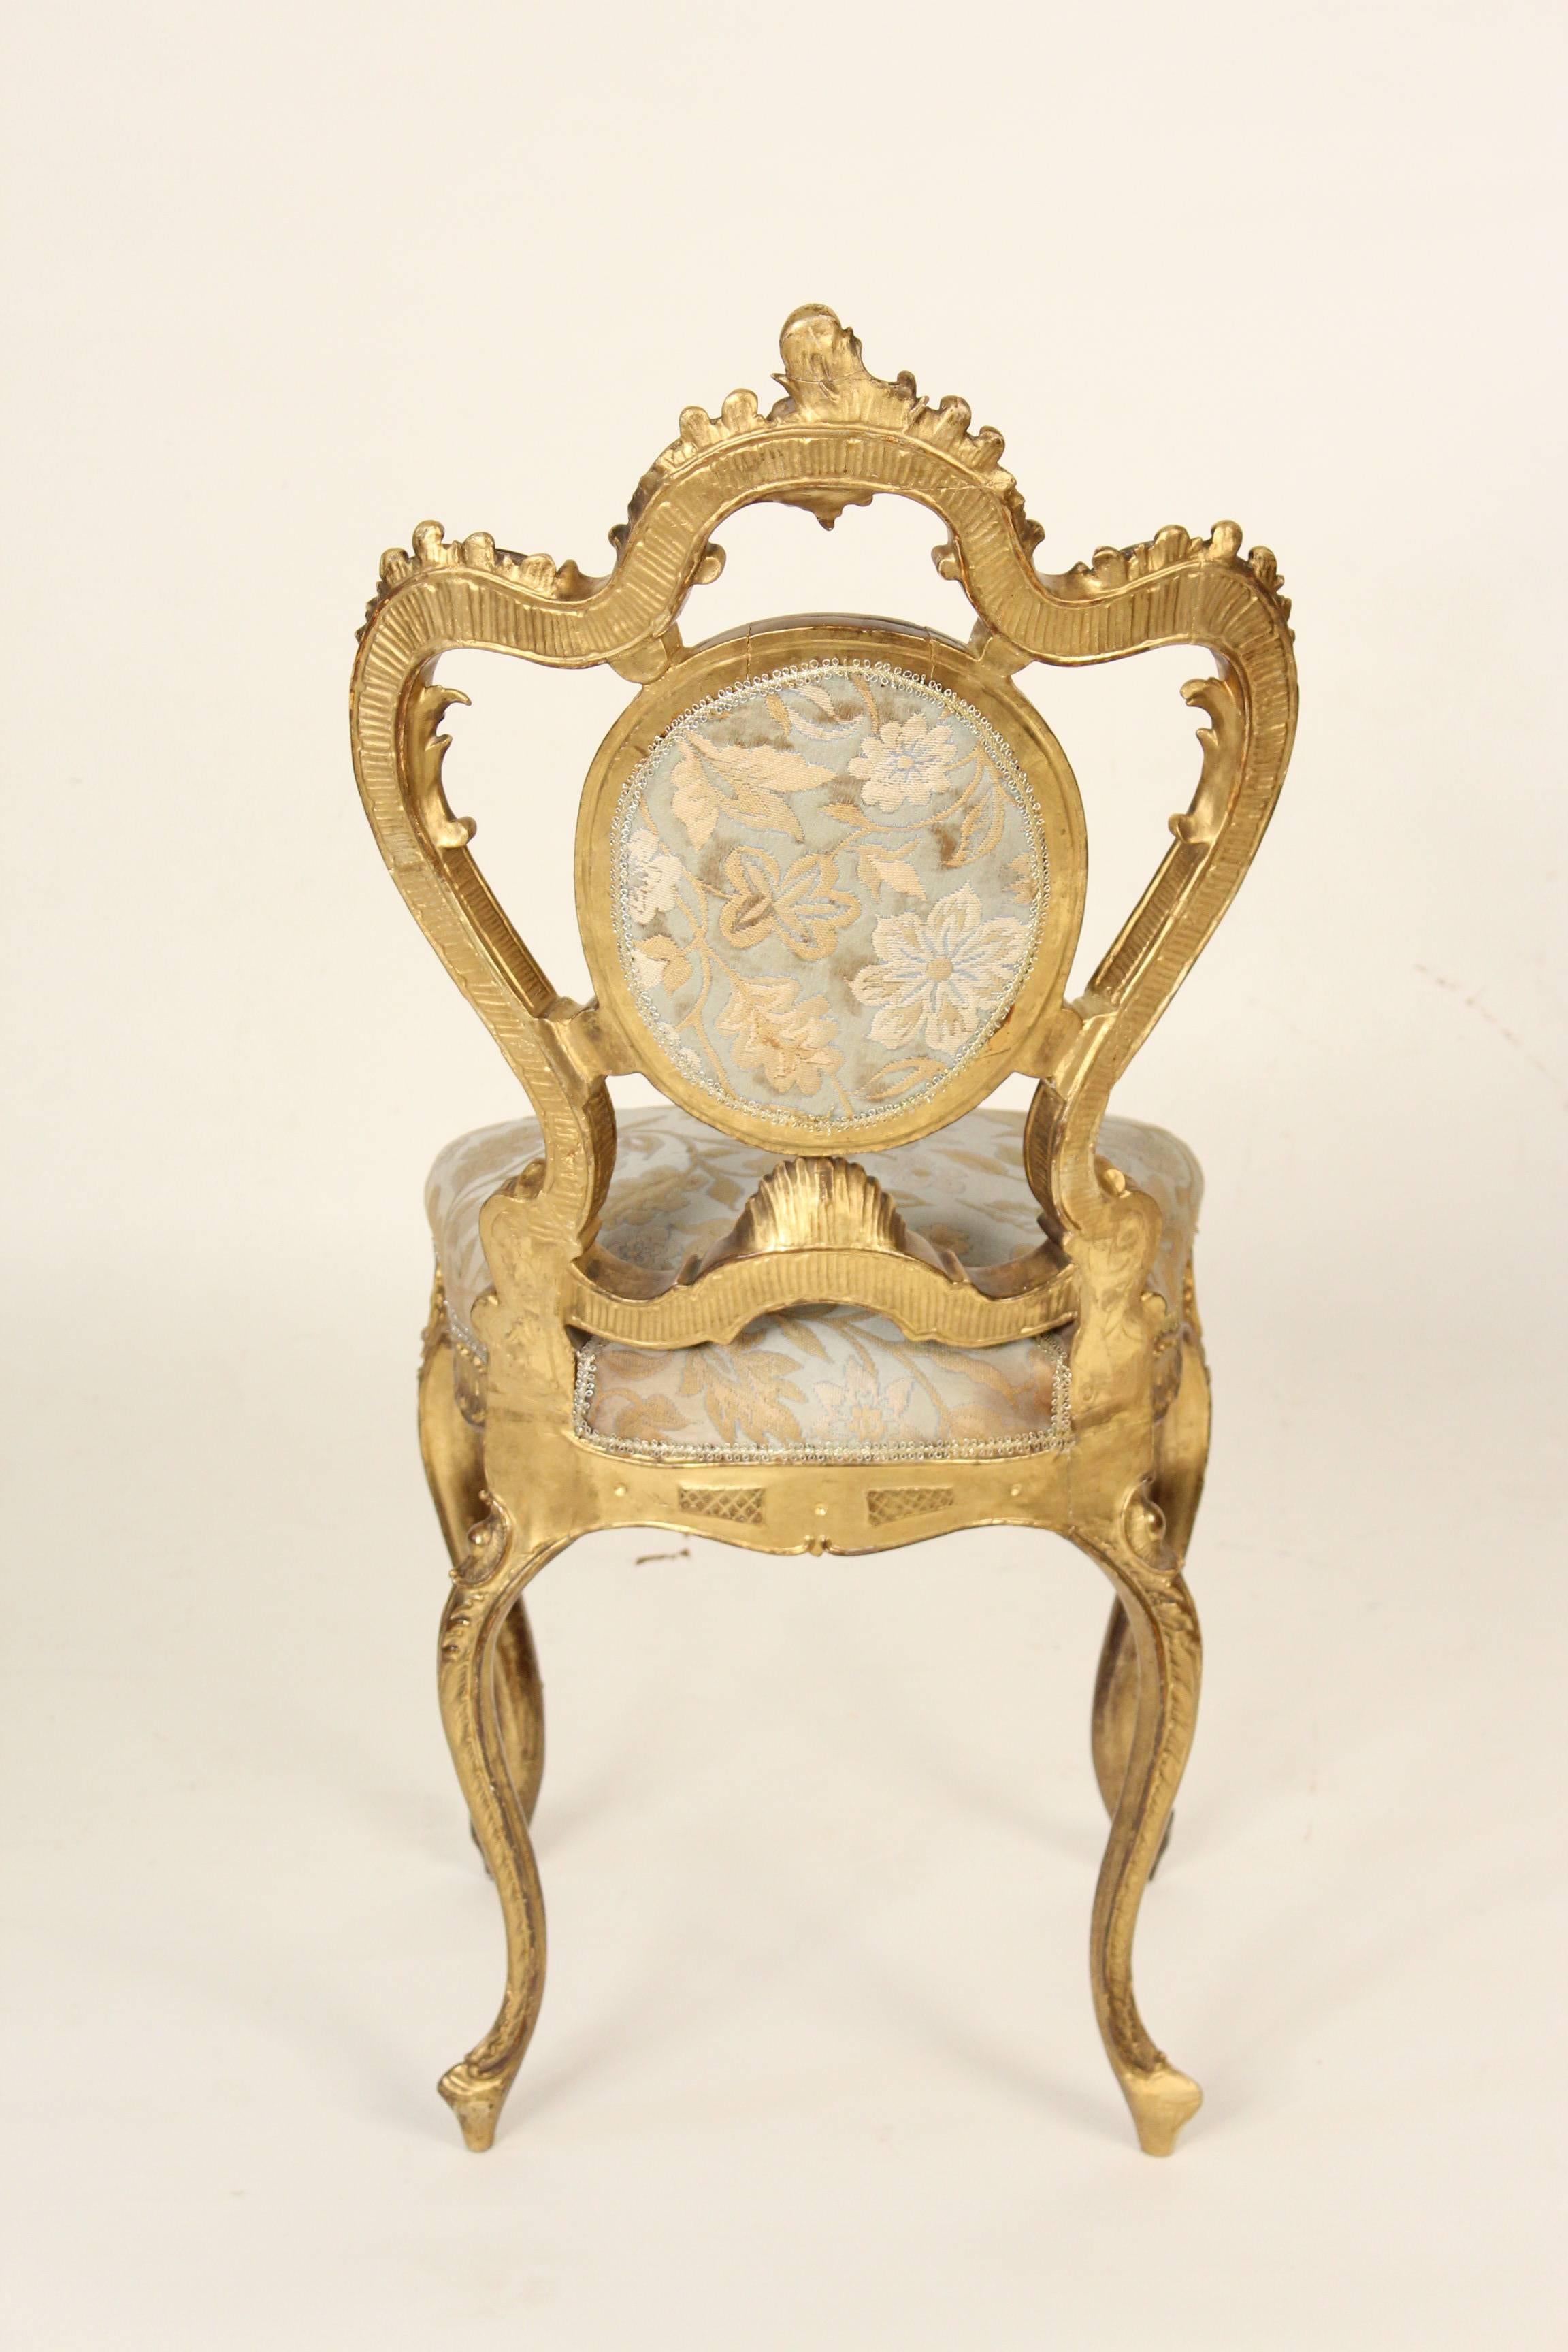 Rococo Revival giltwood vanity or slipper chair, circa 1890. This gem of a chair has fun exaggerated Rococo lines. There was a tremendous amount of skill involved in sculpting and carving this chair, it retains its original gold leaf finish. There